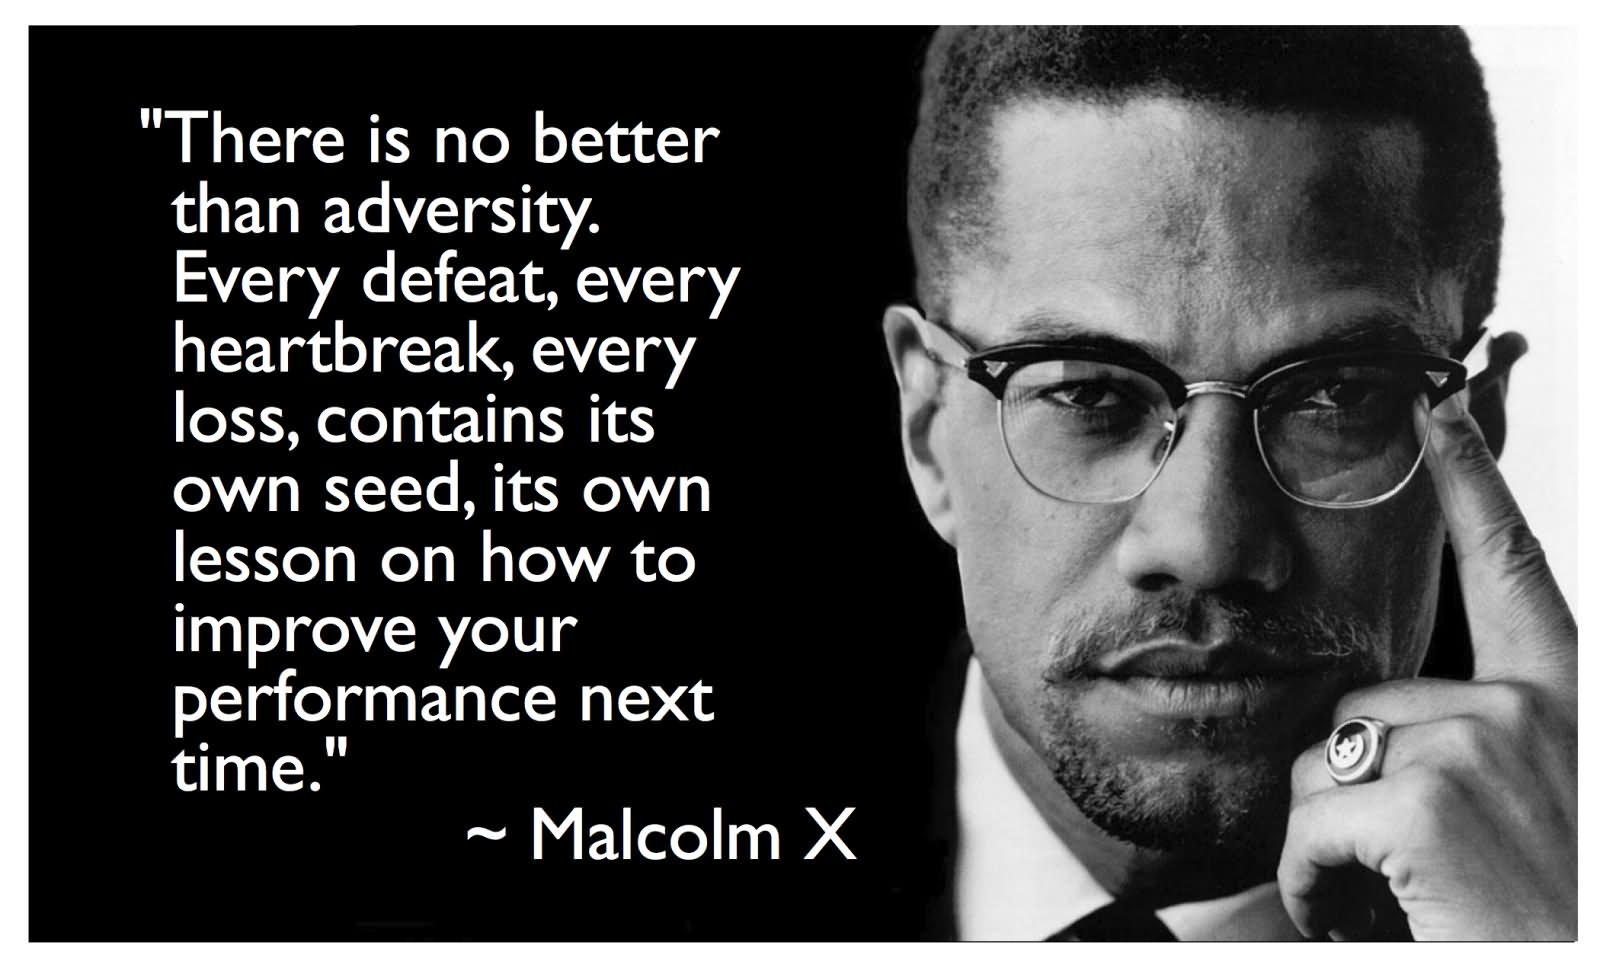 There is no better than adversity. … heartbreak, every loss, contains its own seed, its own lesson on how to improve your performance next time.